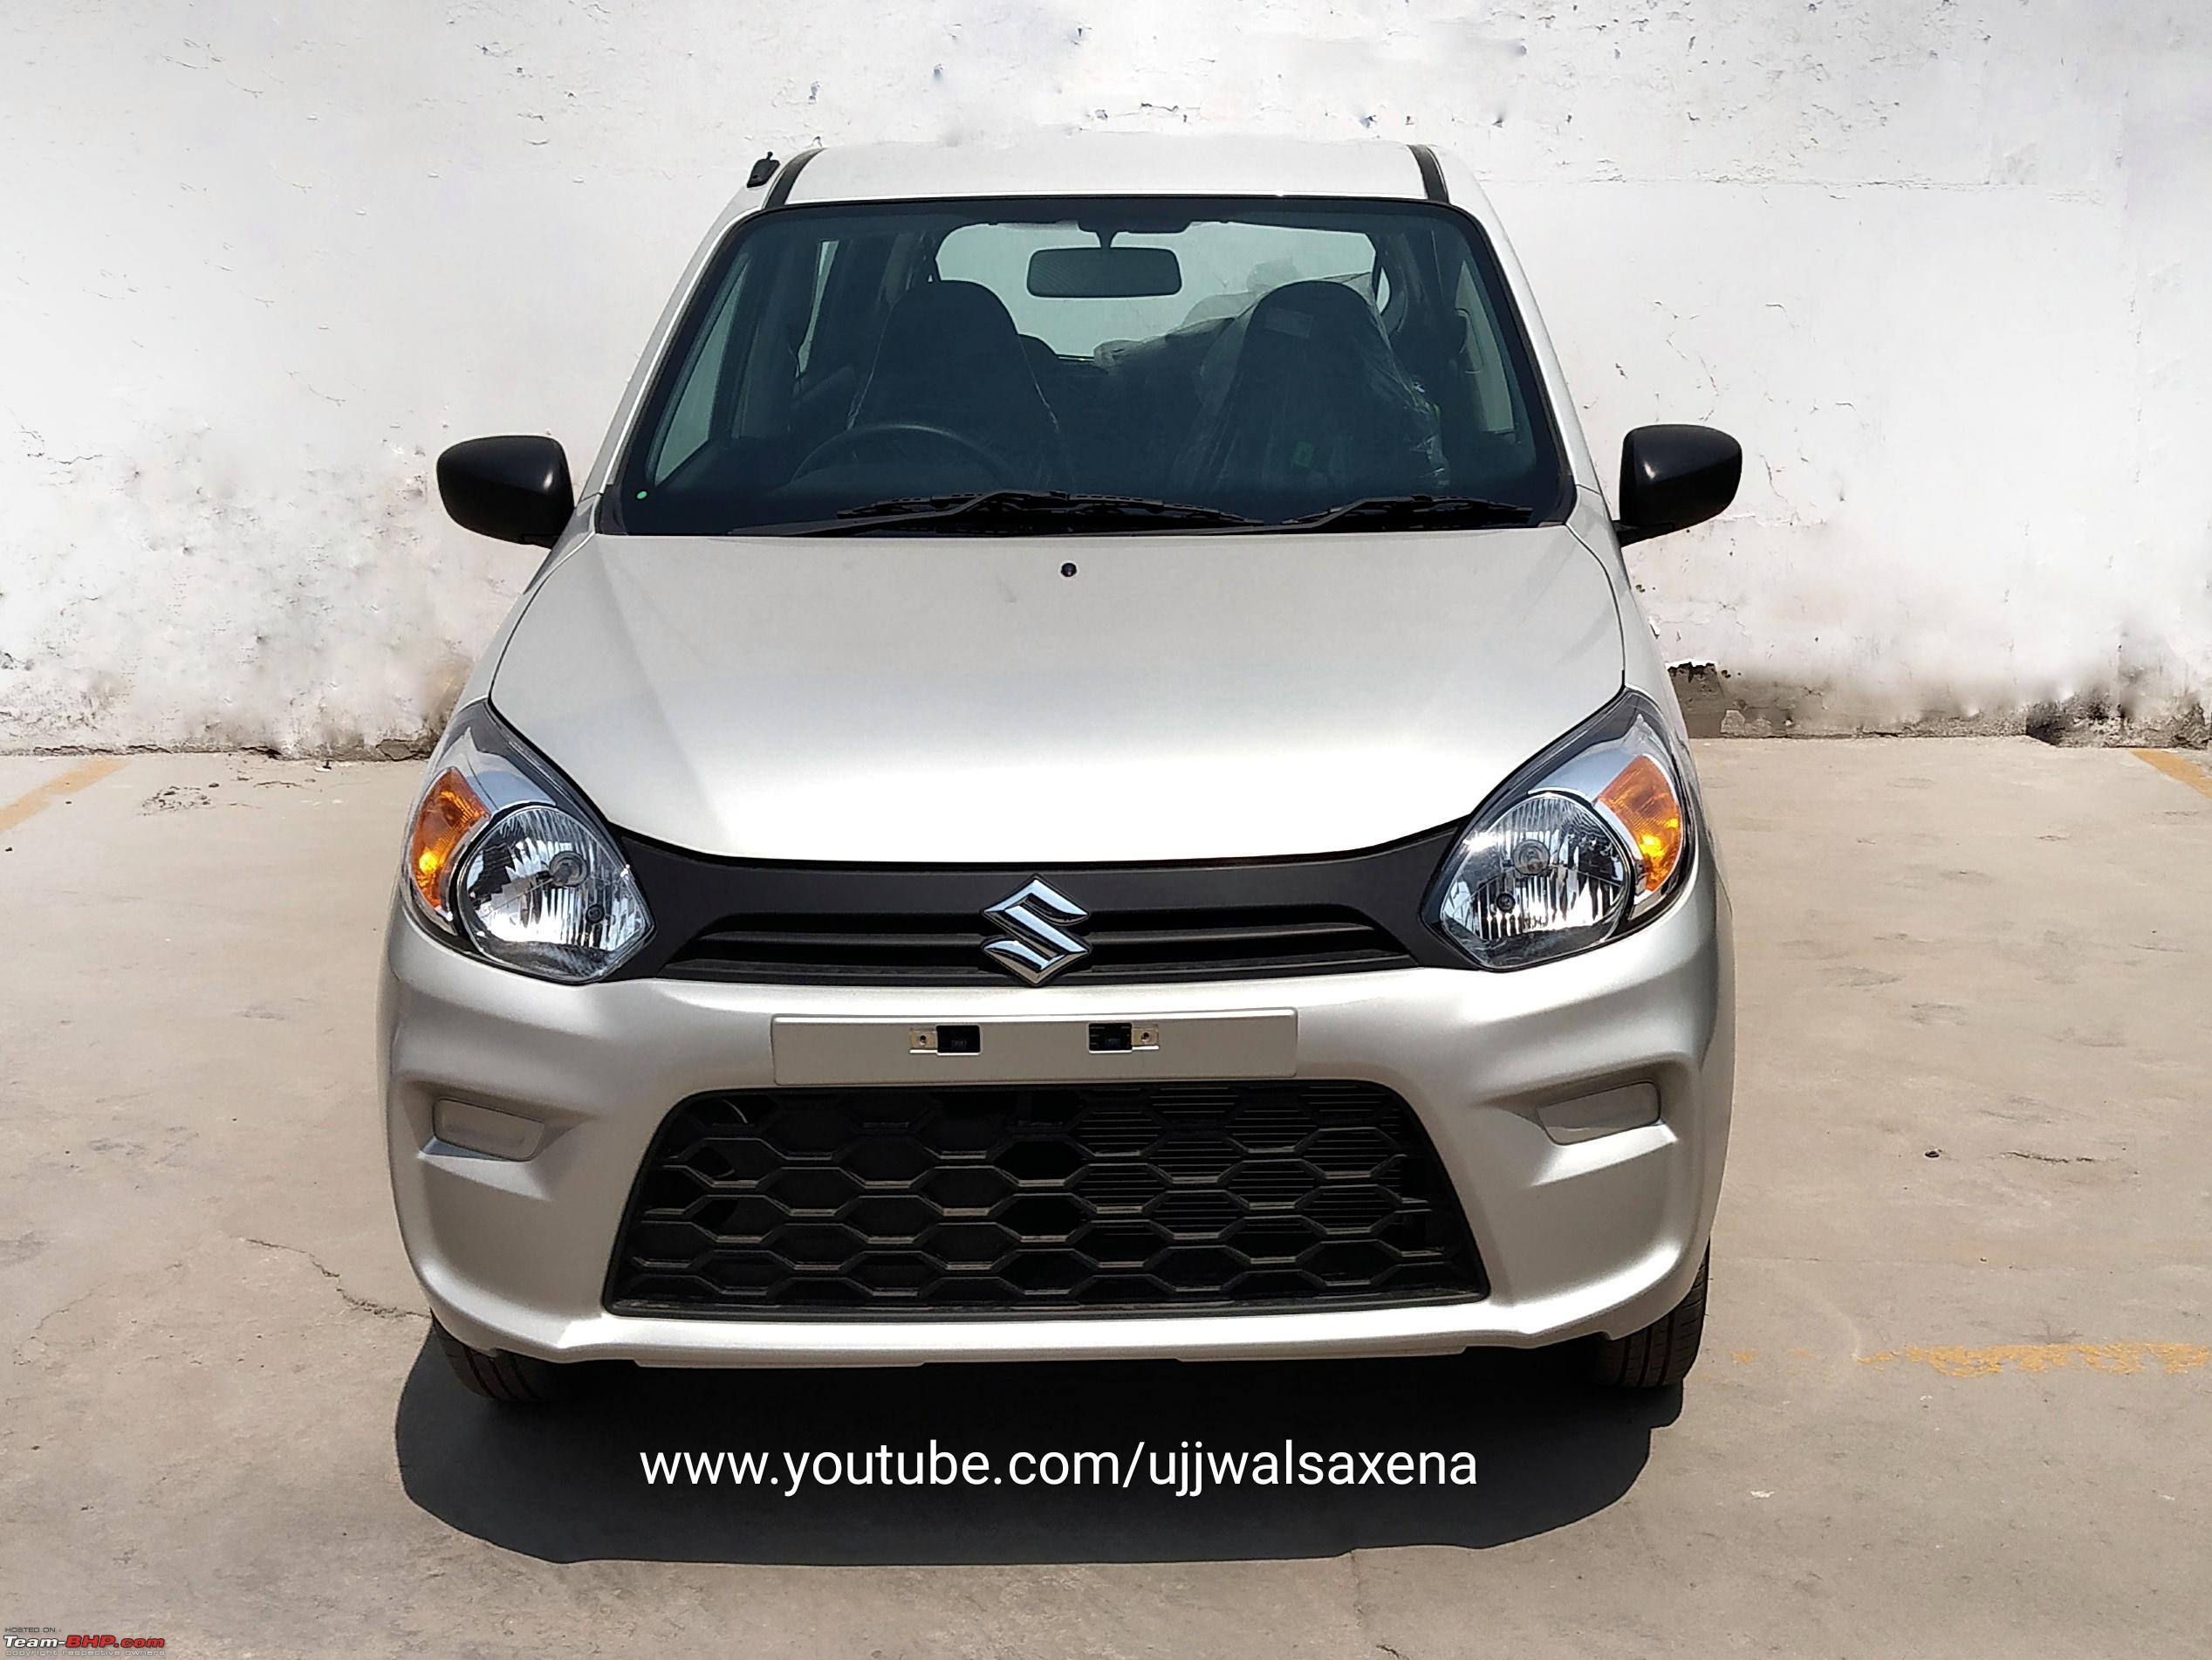 2019 Maruti Alto 800 Facelift Spotted Edit Now Launched Rs